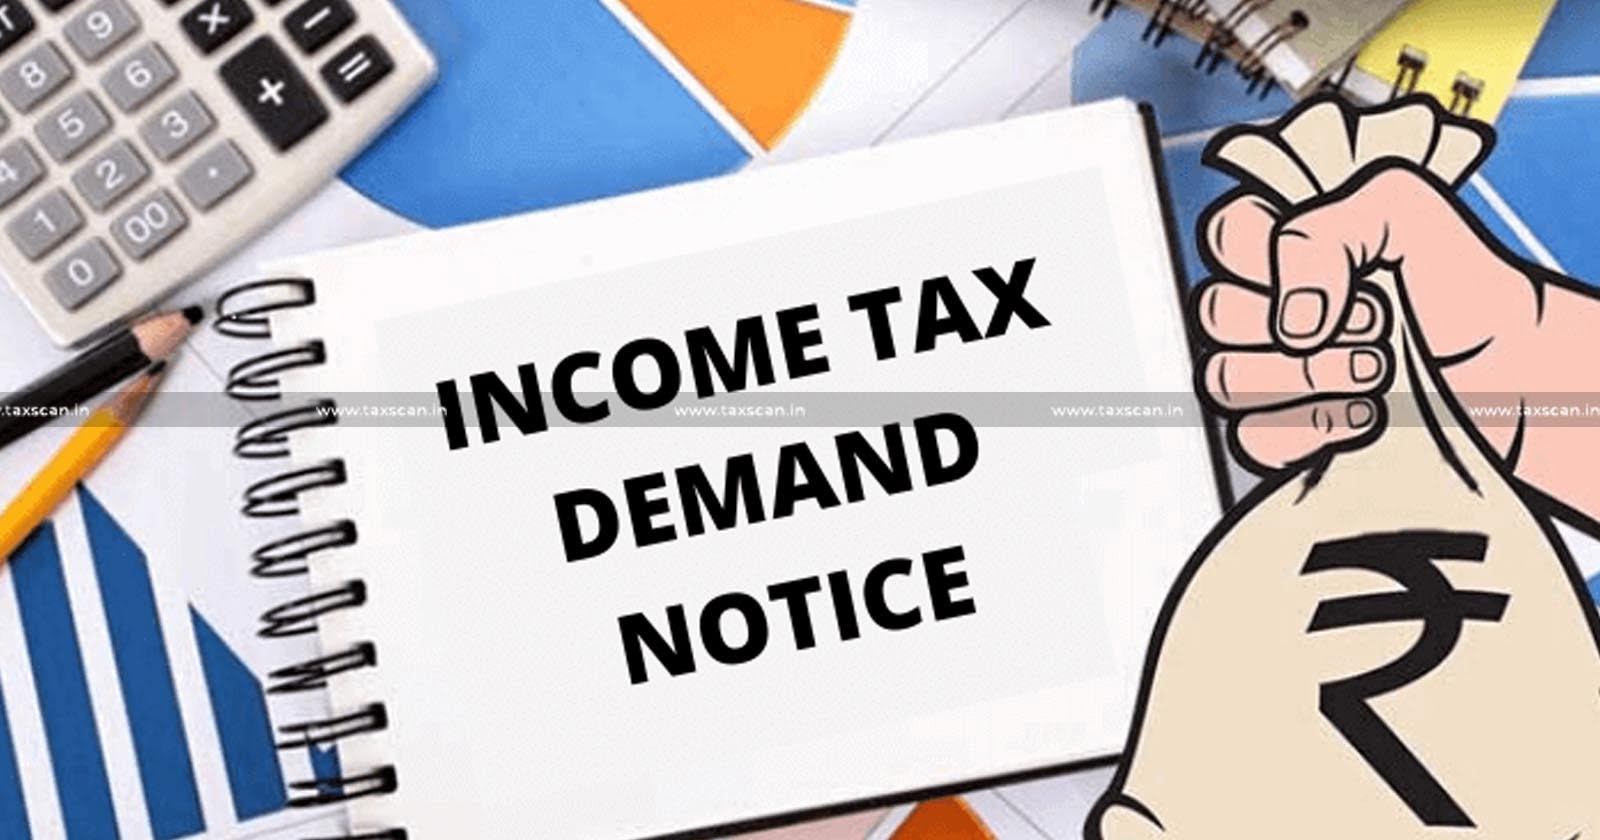 Income Tax Demand Notice - Income Tax - Income Tax Demand - demand notice - non-compliance - notice - Punjab and Haryana High Court - Tax - Taxscan